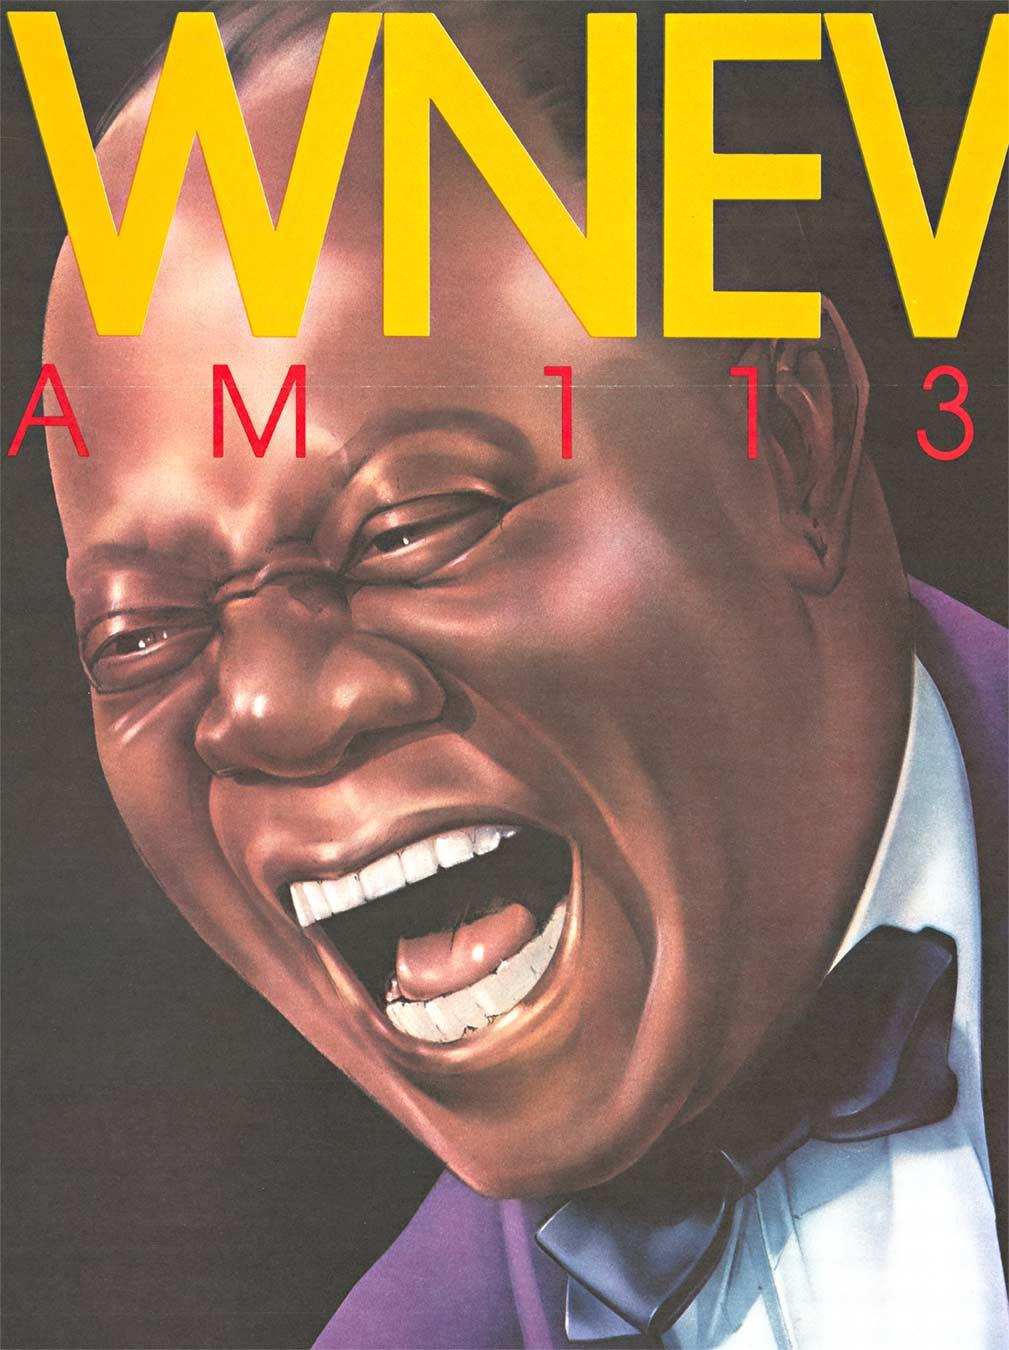 The original WNEW AM 1130 poster features Louis Armstrong.
Blessed with America's Best, linen-backed, fine condition.   Ready to frame.

Metromedia Radio broadcasts music in the tradition of the World’s Greatest Radio Station, WNEW-AM.  In 1934,